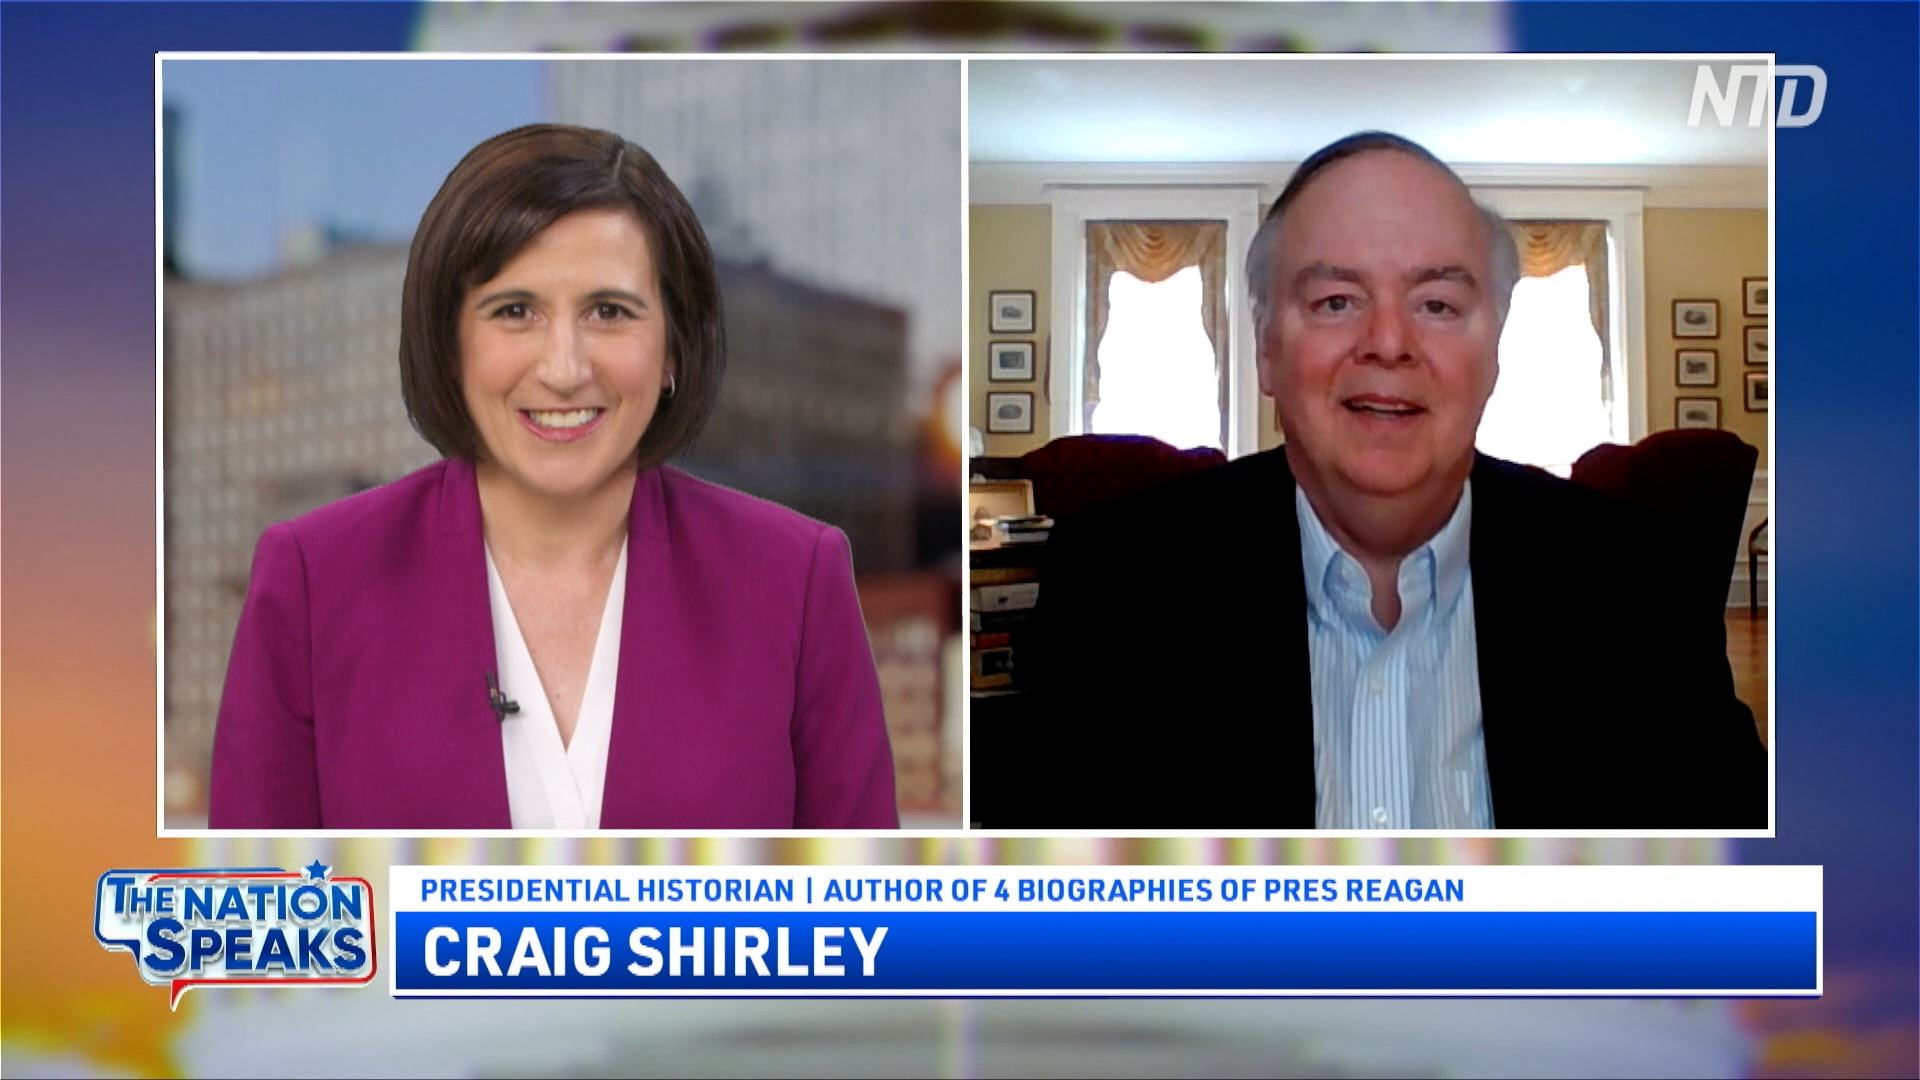 Pres Reagan’s Graceful Handling of Assassination Attempt Created Bond With Voters: Craig Shirley